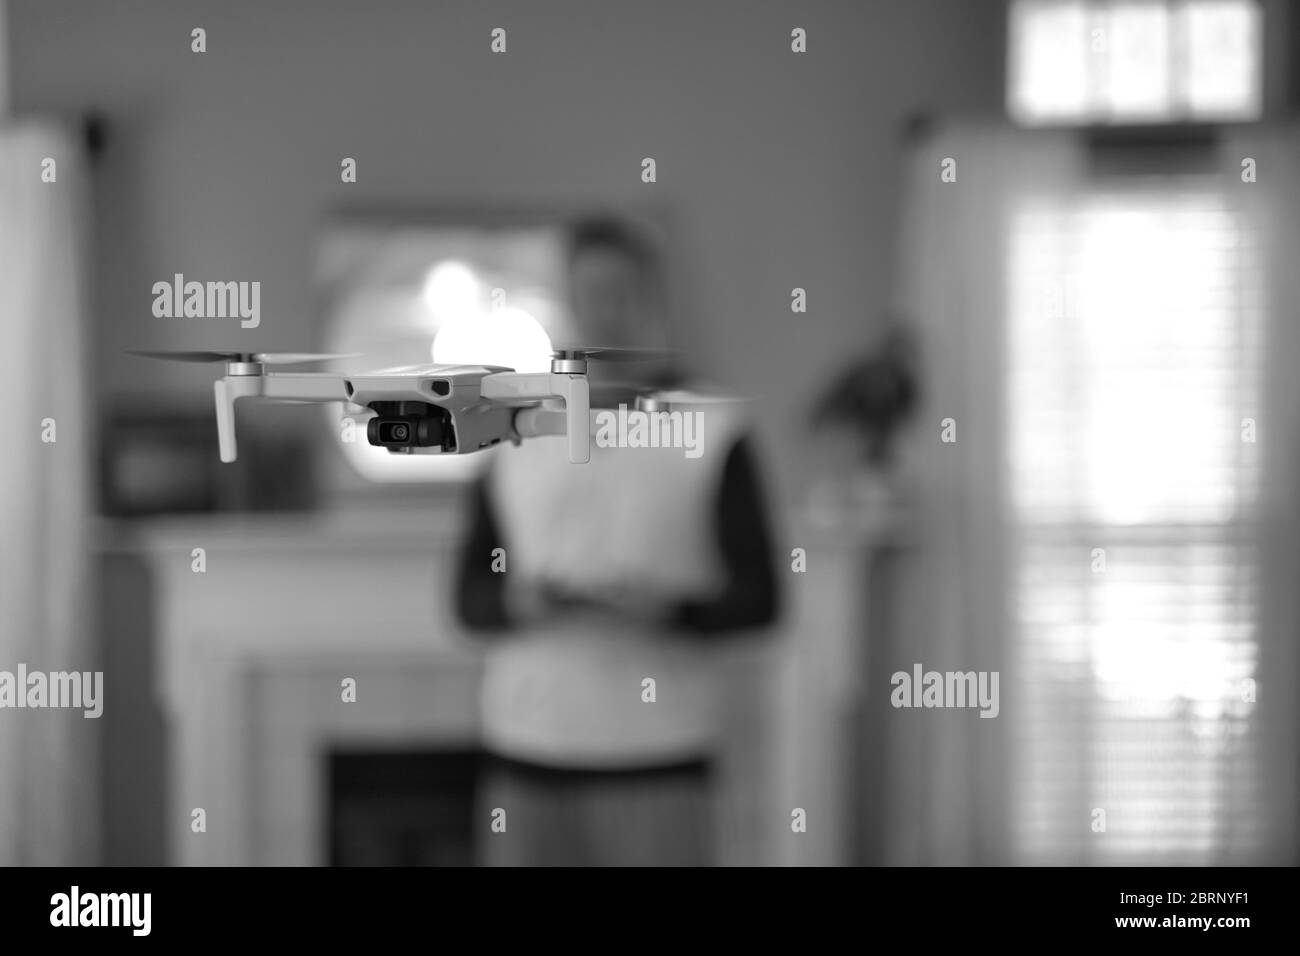 Drone flying indoors with pilot visible in background. Amateur drone flight. User wearing sweatshirt flying drone inside of home on cold day. White dr Stock Photo